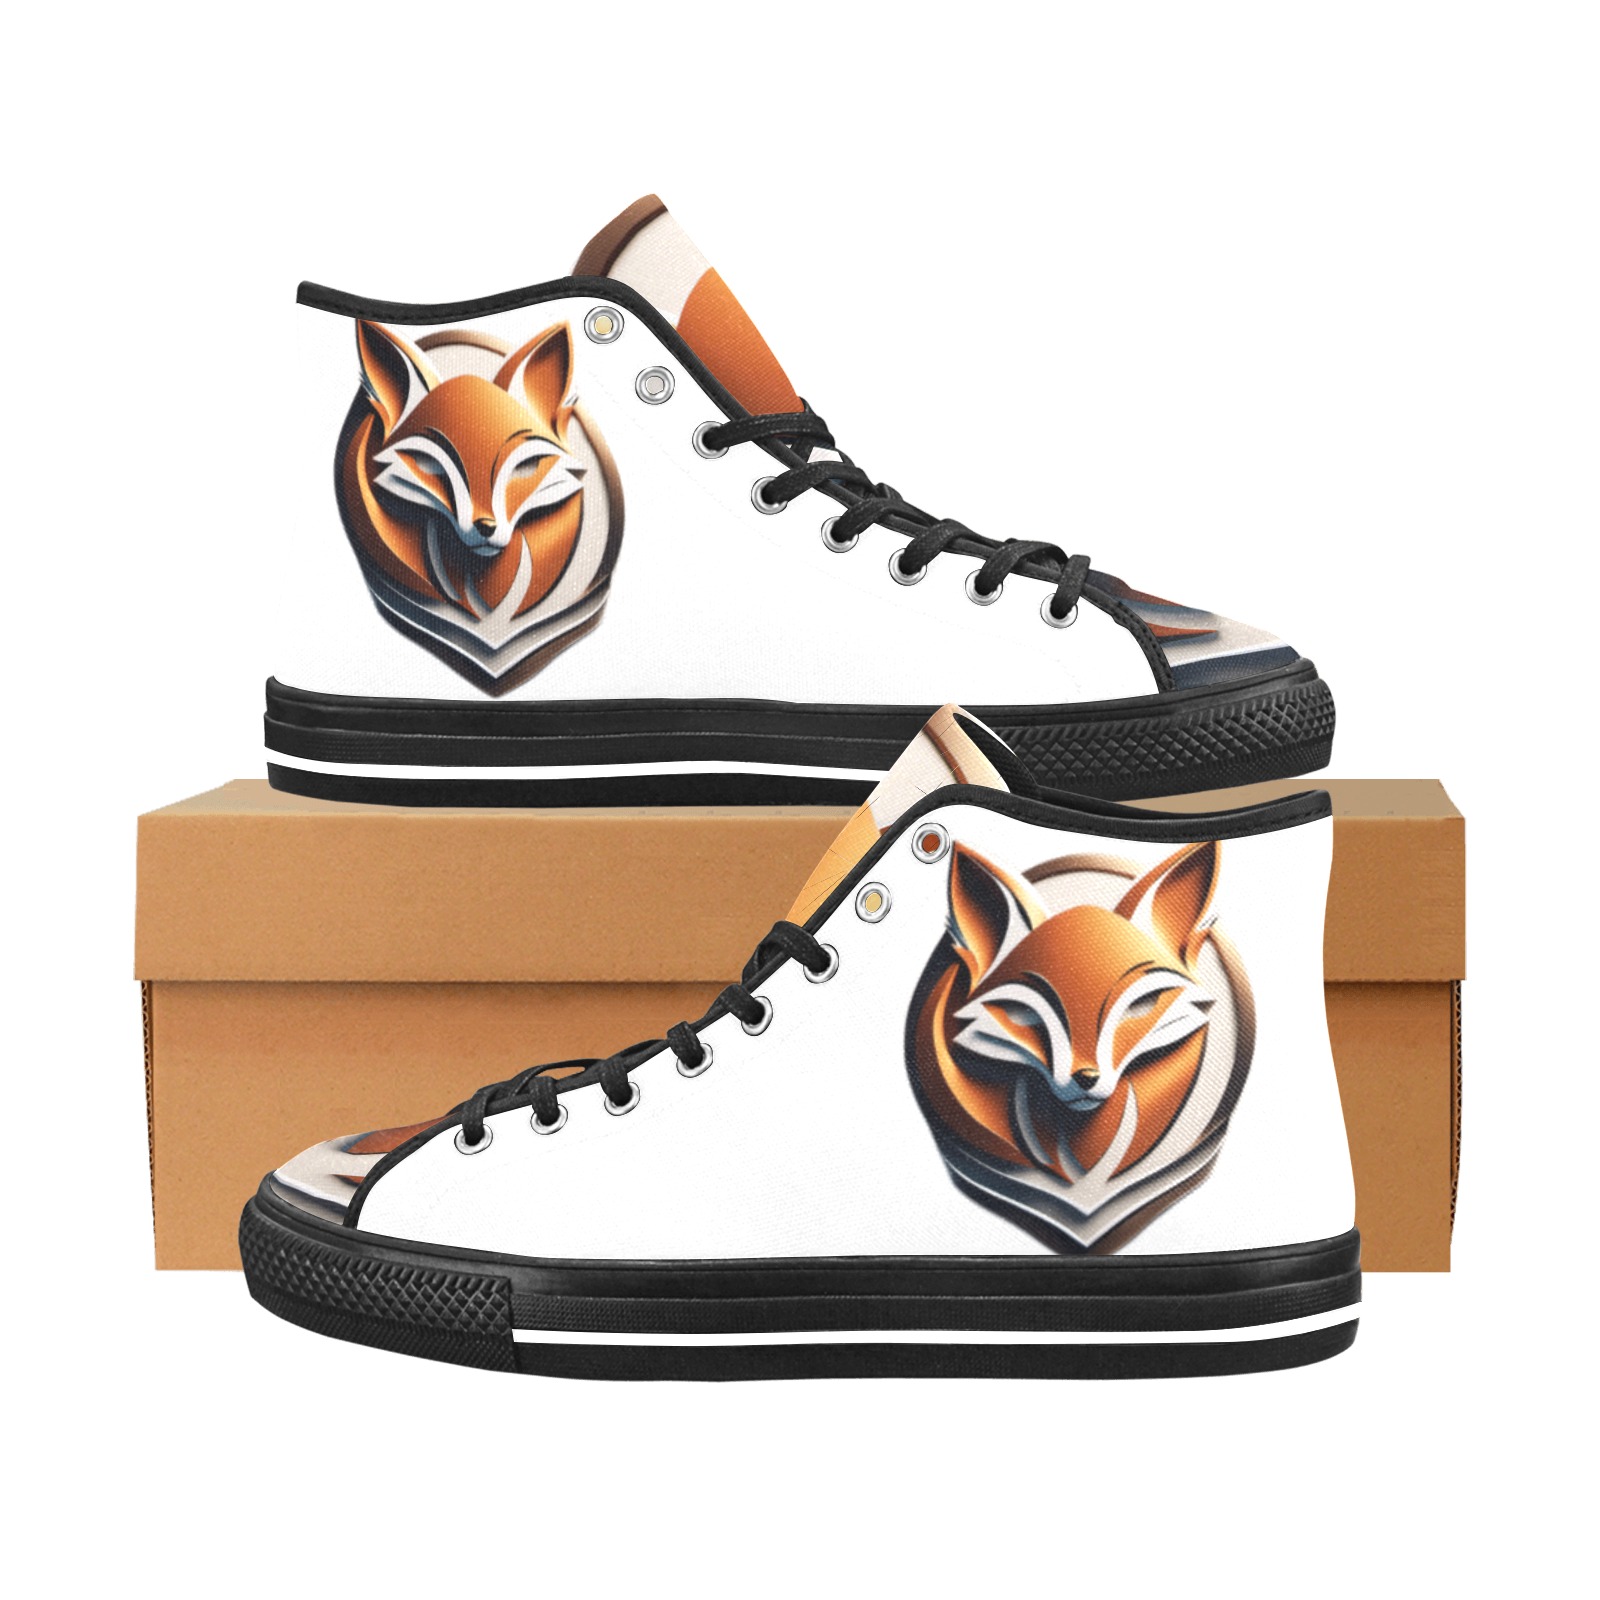 IMG_6809 Vulpine Sneakers Vancouver H Men's Canvas Shoes (1013-1)